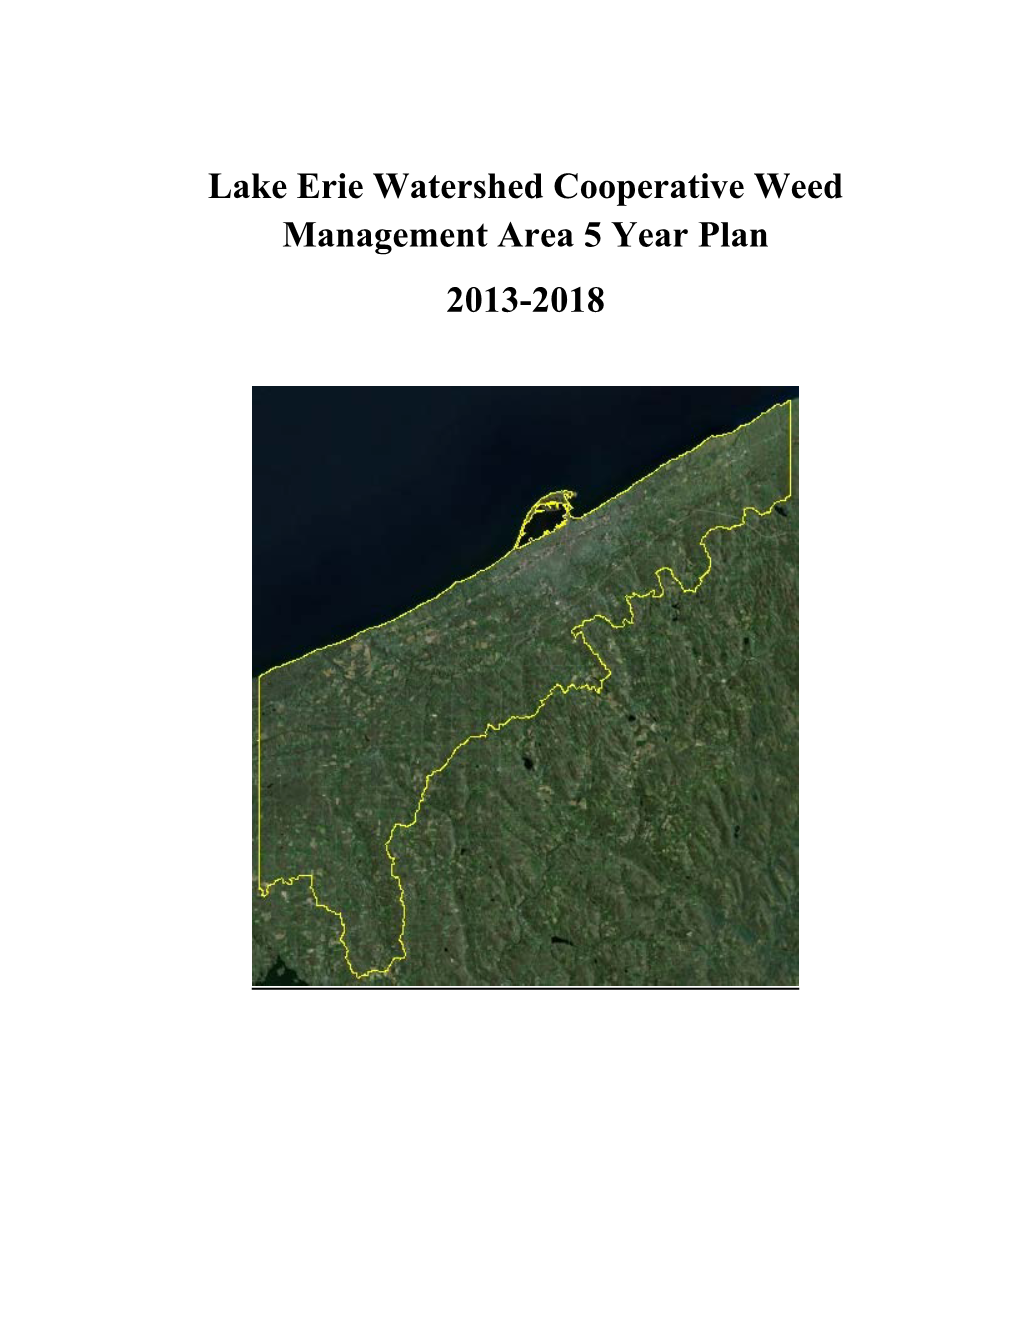 Lake Erie Watershed Cooperative Weed Management Area 5 Year Plan 2013-2018